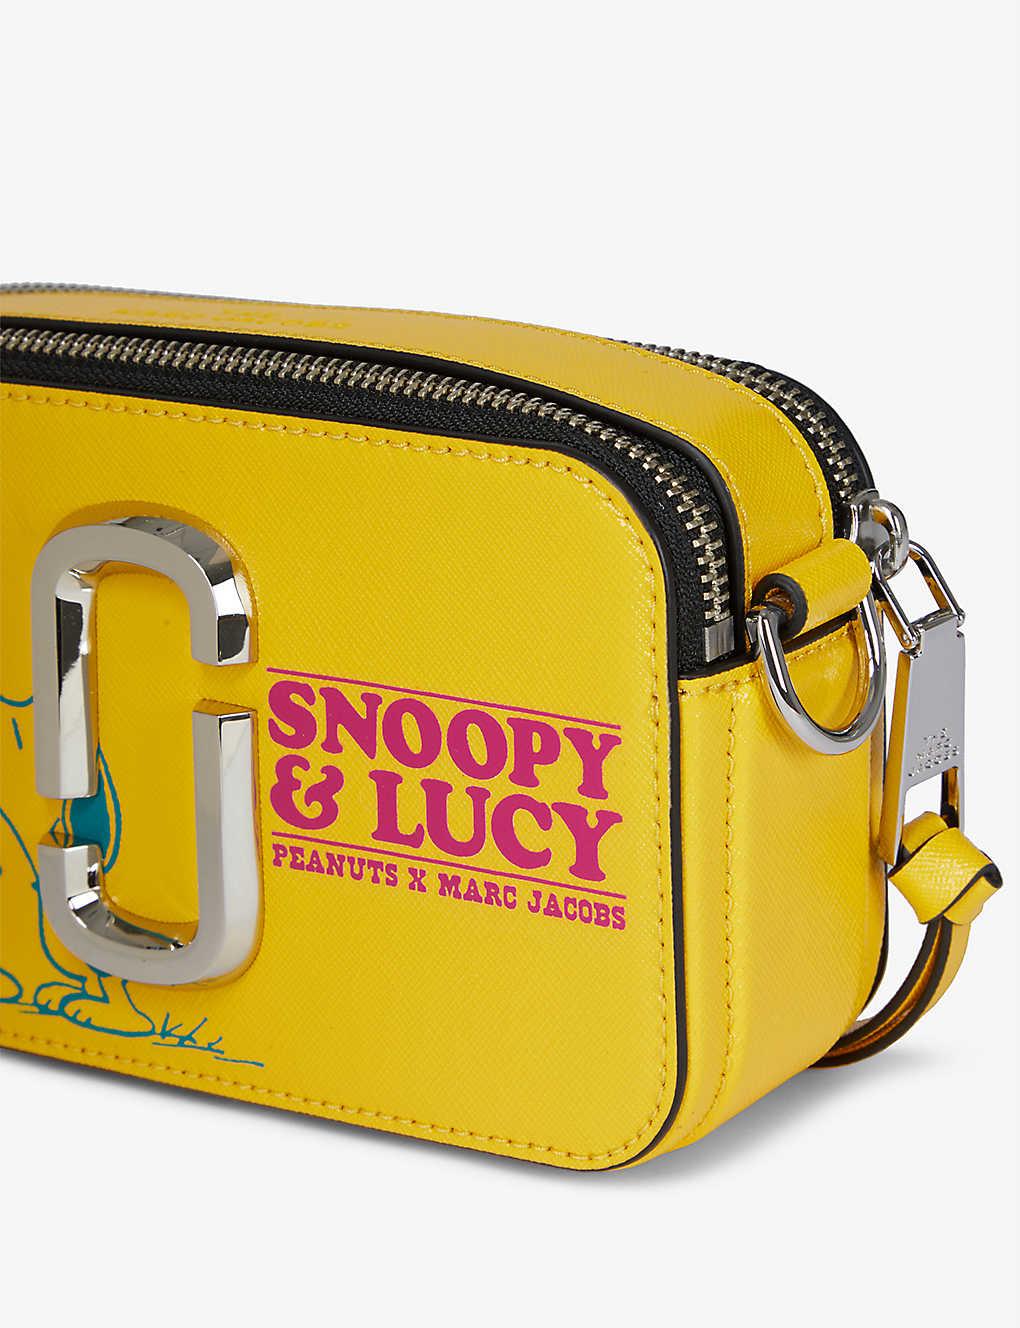 Marc Jacobs X Peanuts Snapshot Snoopy And Lucy Print Leather Cross